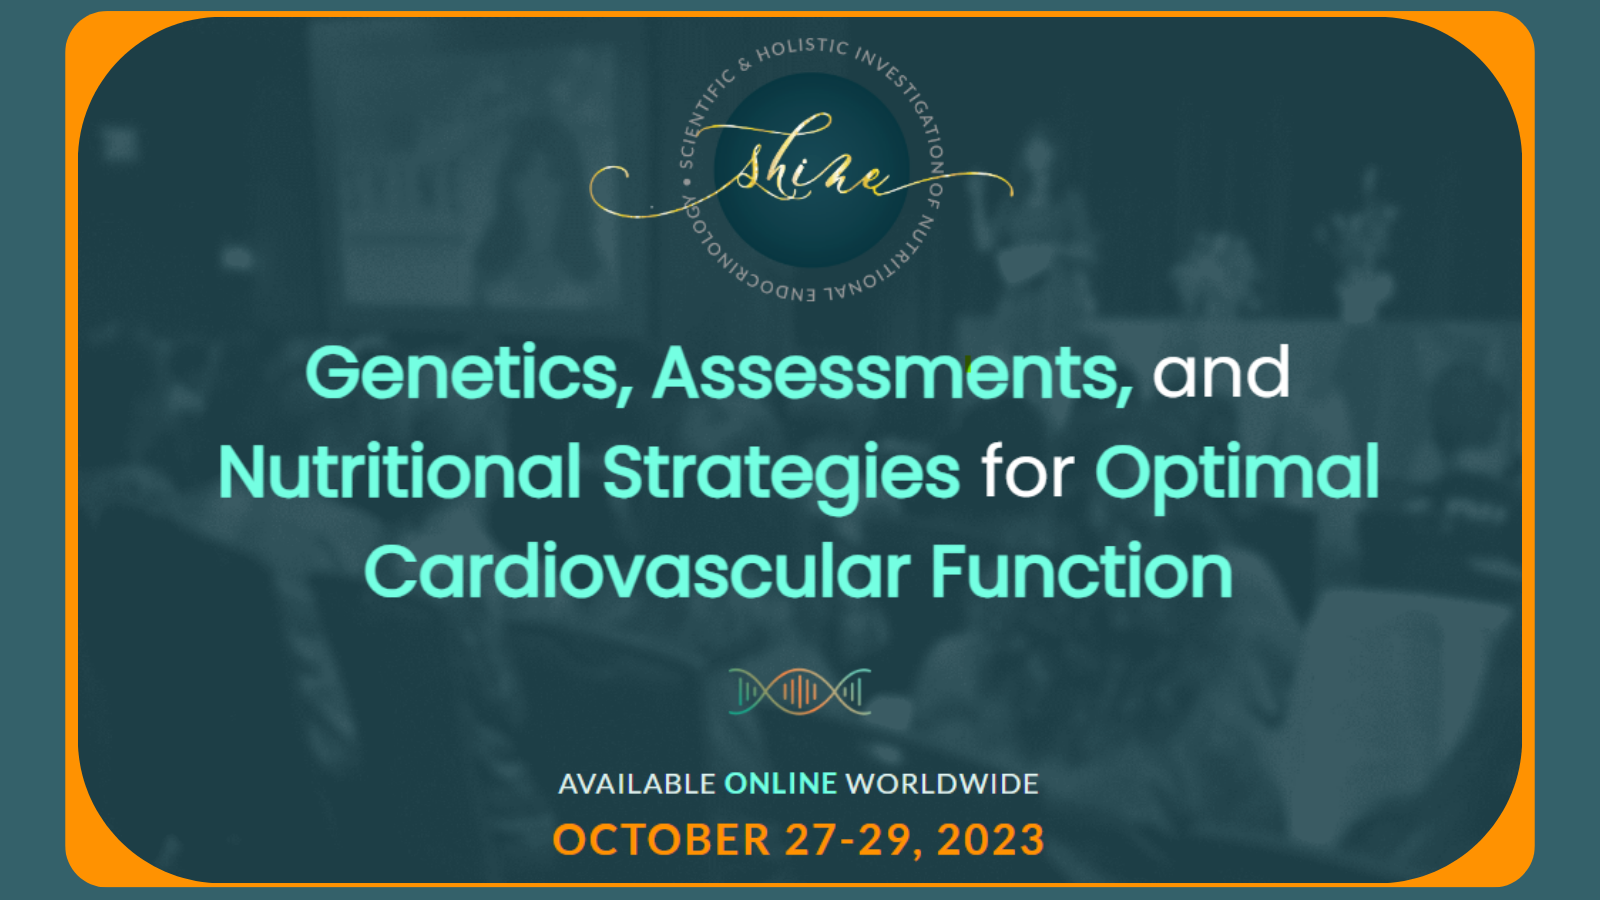 SHINE Conference 2023: Genetics, Assessments, and Nutritional Strategies for Optimal Cardiovascular Function